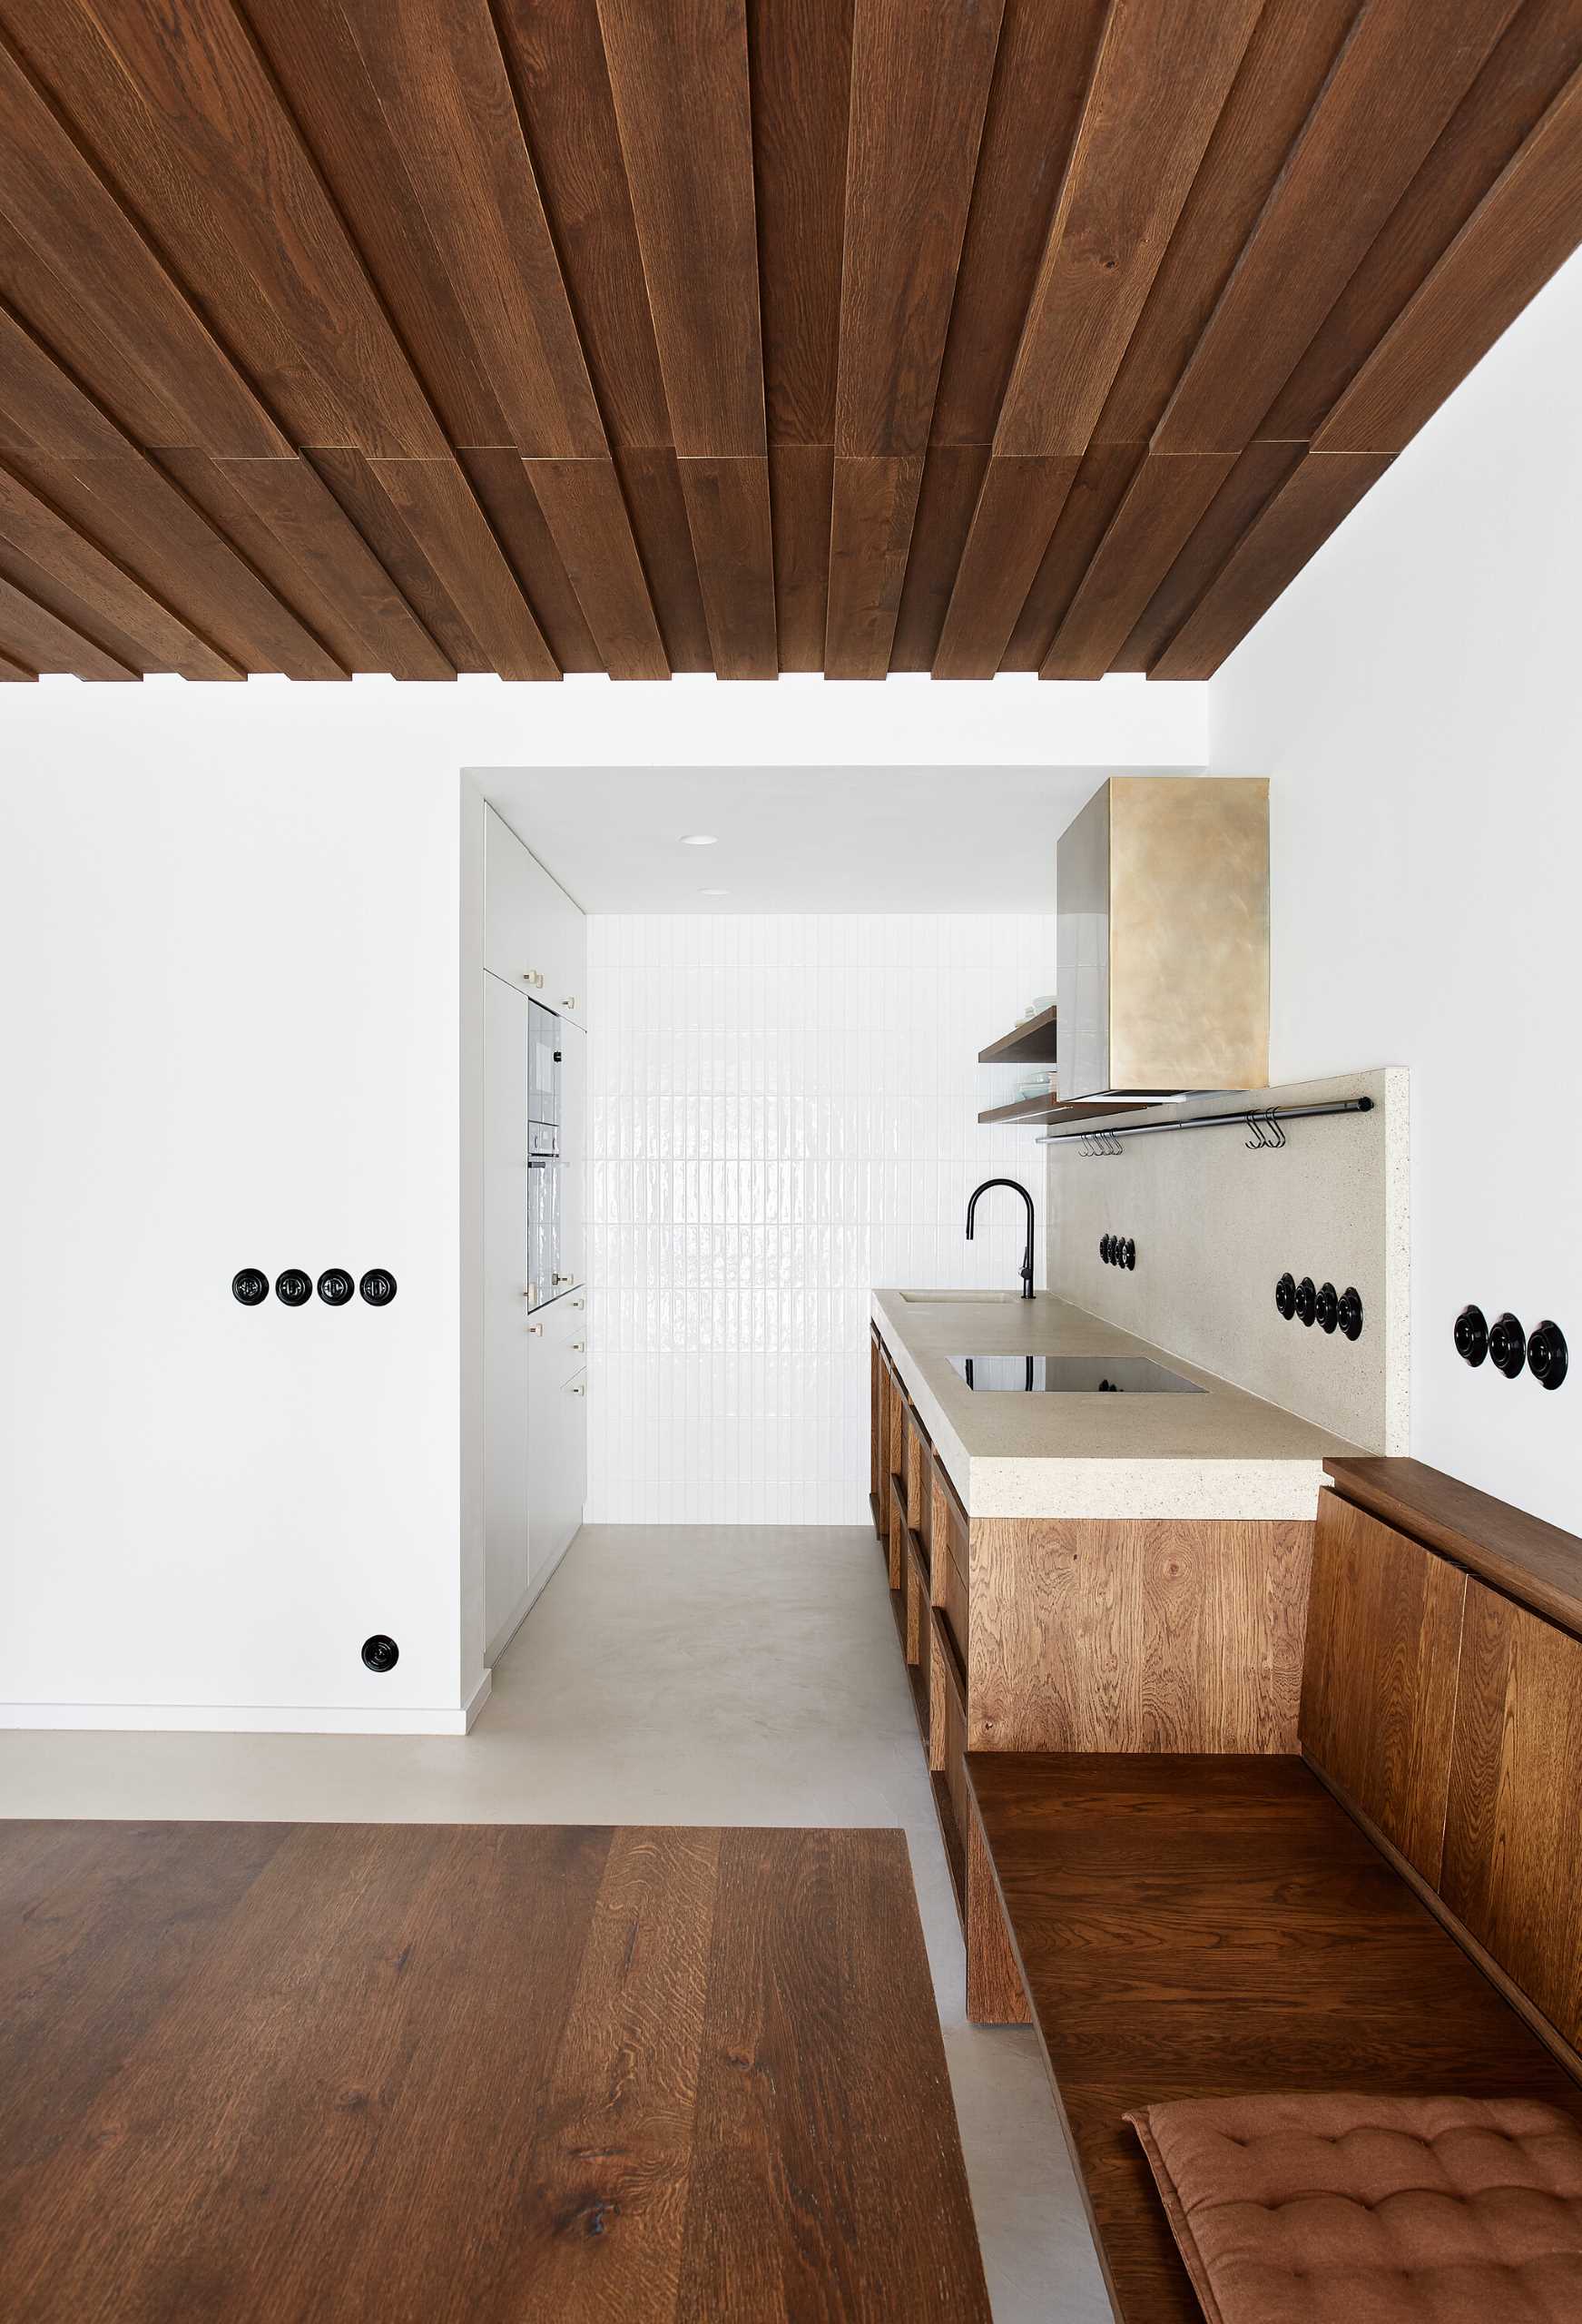 This modern kitchen has a wall of white tiles, a concrete countertop, and wood cabinets.